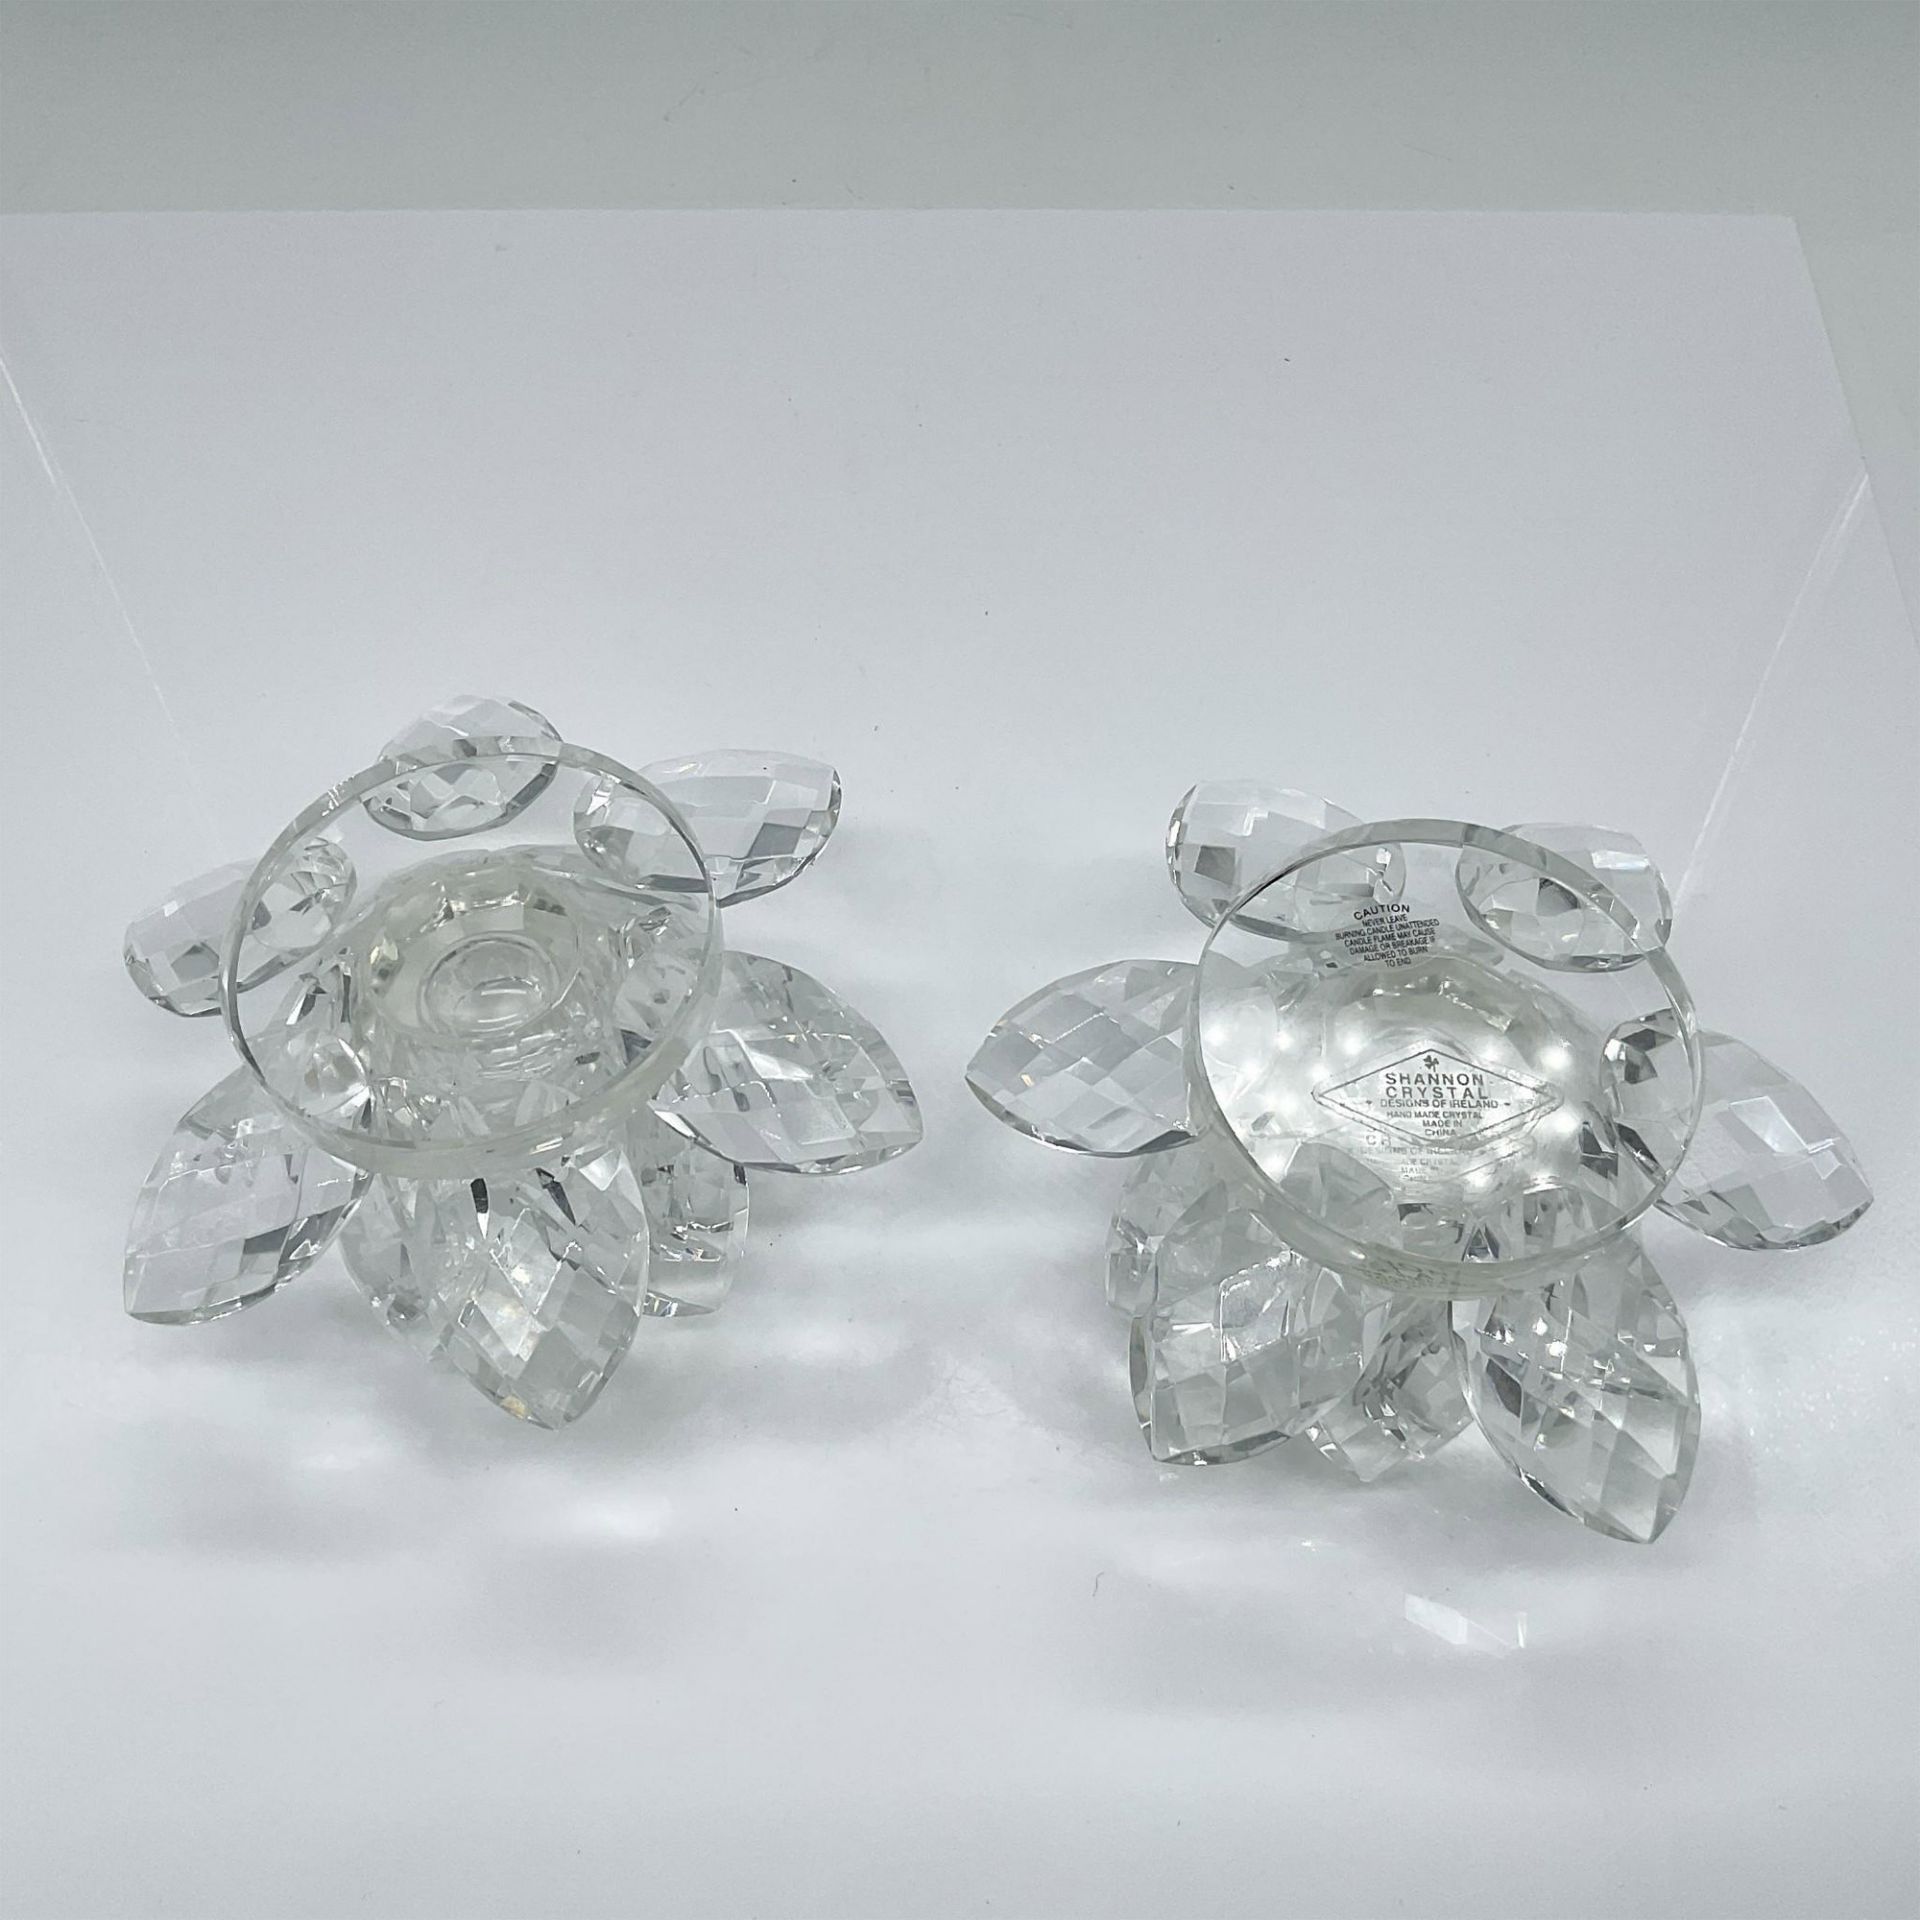 2pc Crystal Lotus Flower Candle Holders - Image 3 of 3